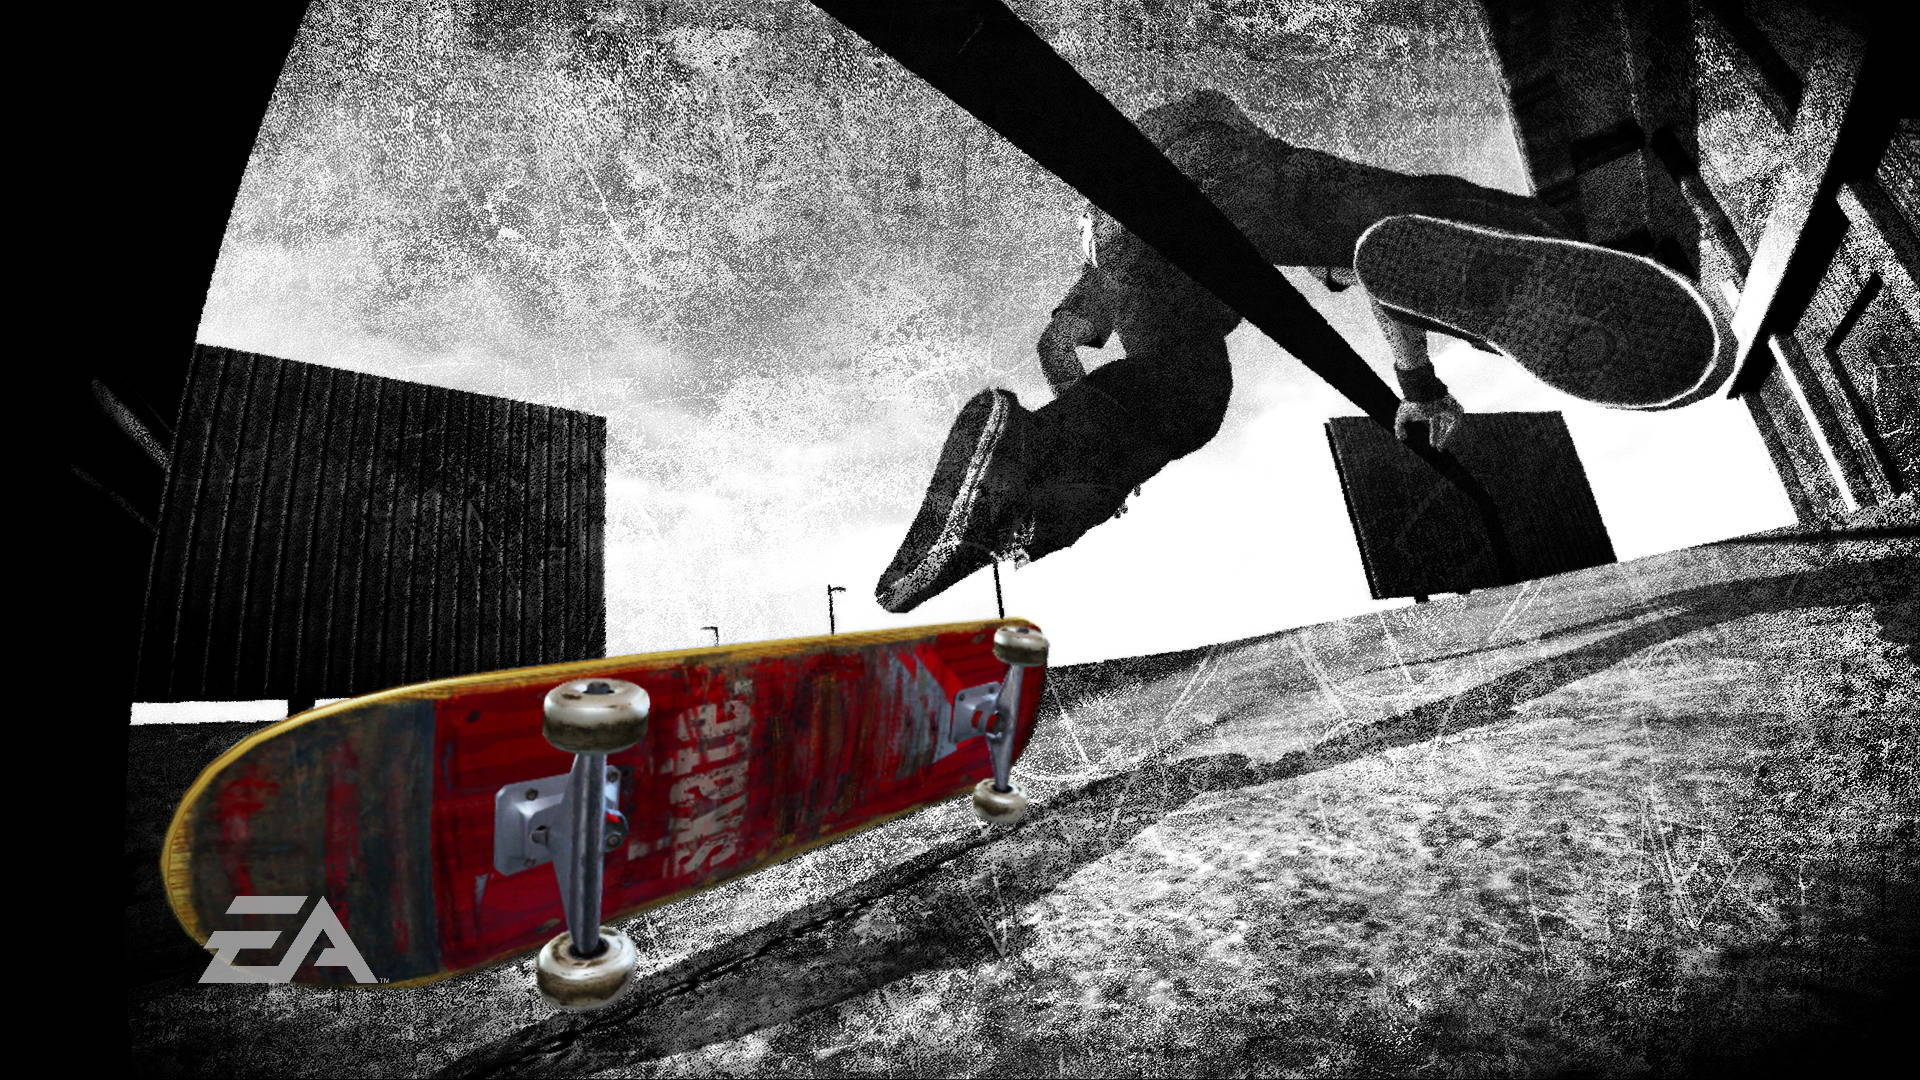 Enjoy the thrill of skating with this vintage red skateboard! Wallpaper